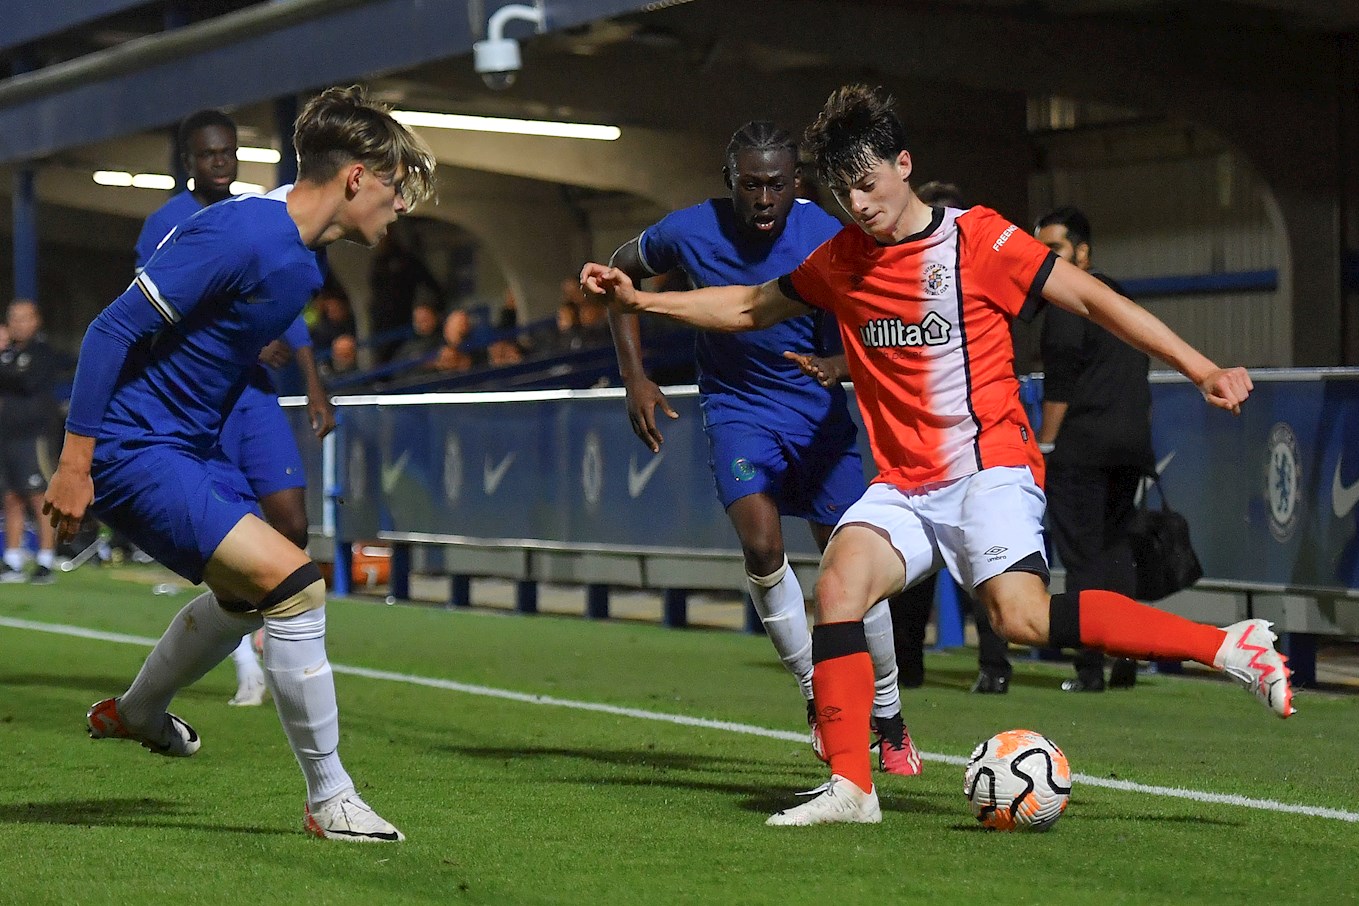 Axel Piesold in action against Chelsea Under-21s